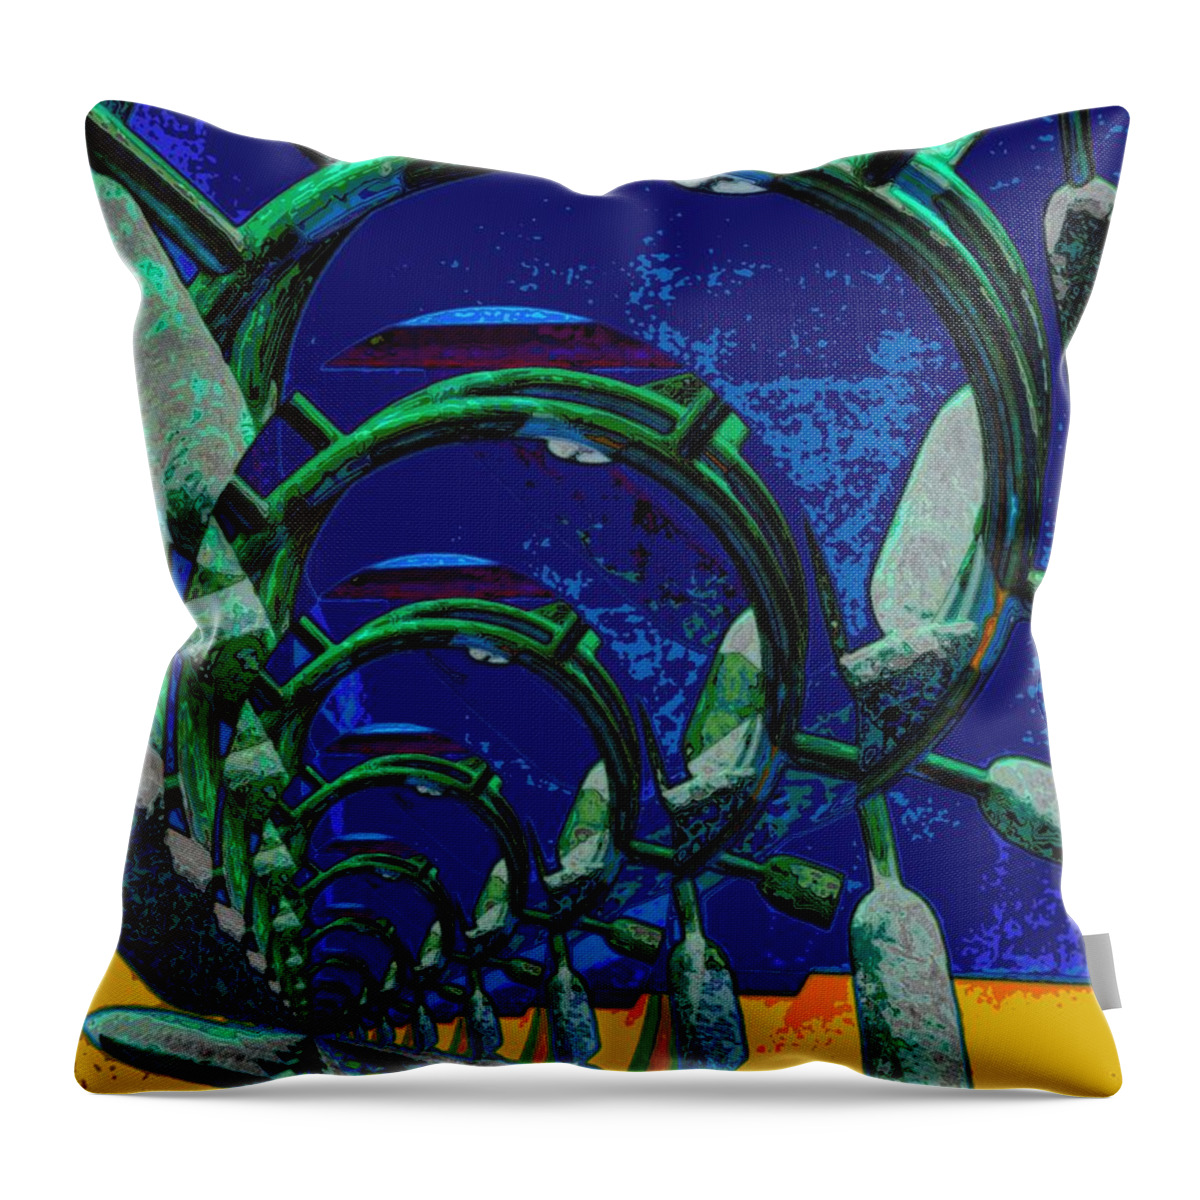 Time Throw Pillow featuring the digital art Route 66 2050 by Alec Drake